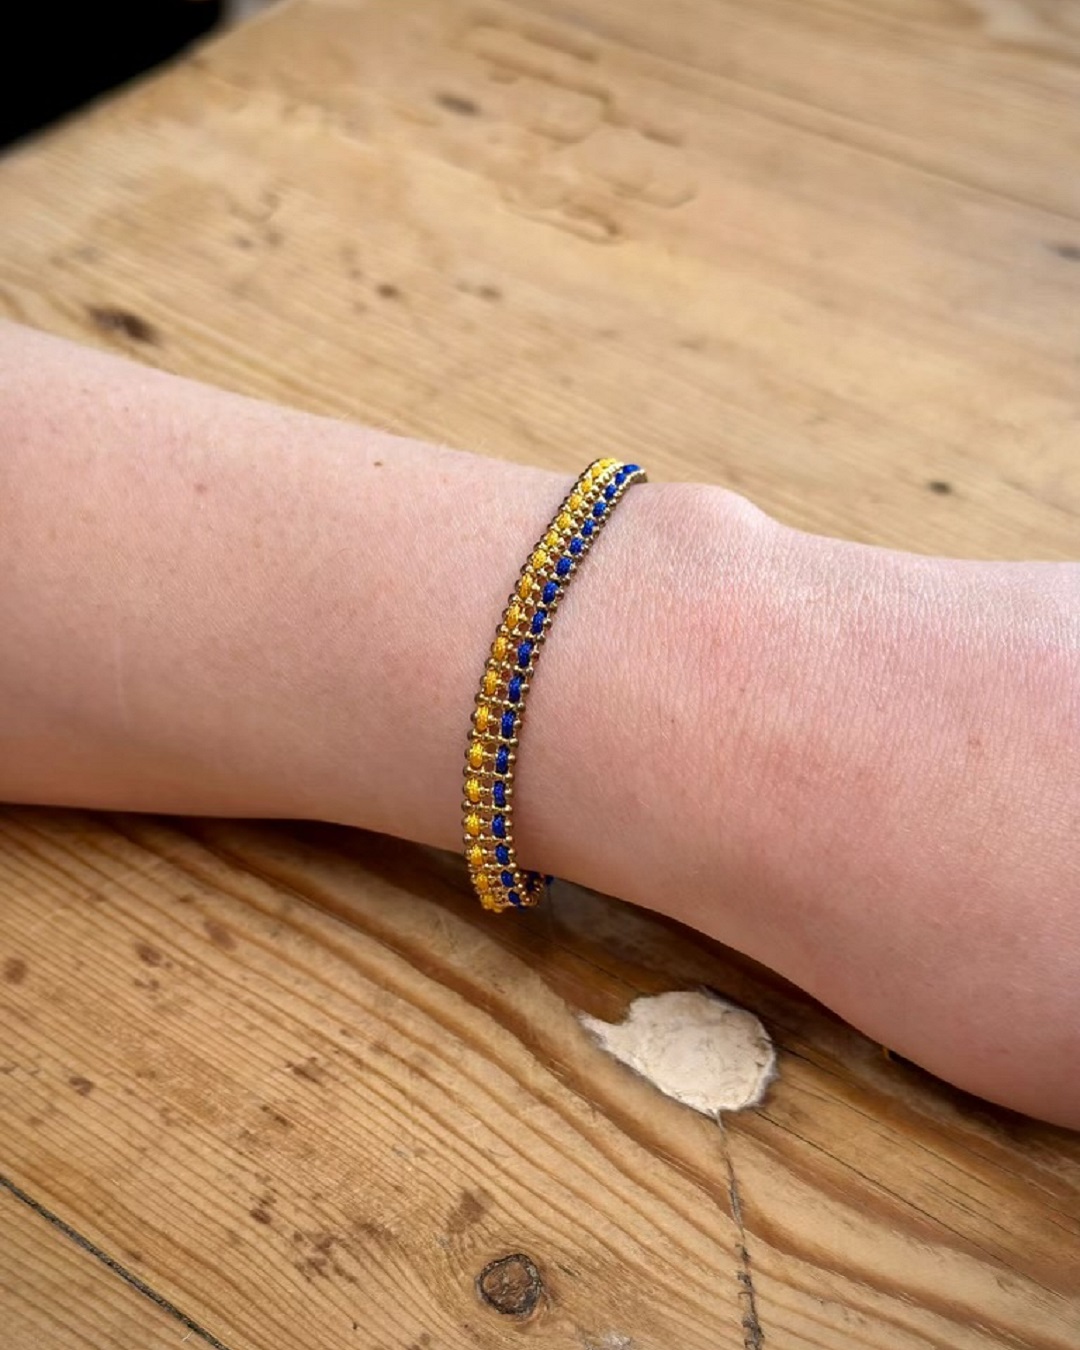 knitted blue and yellow bracelet on wrist